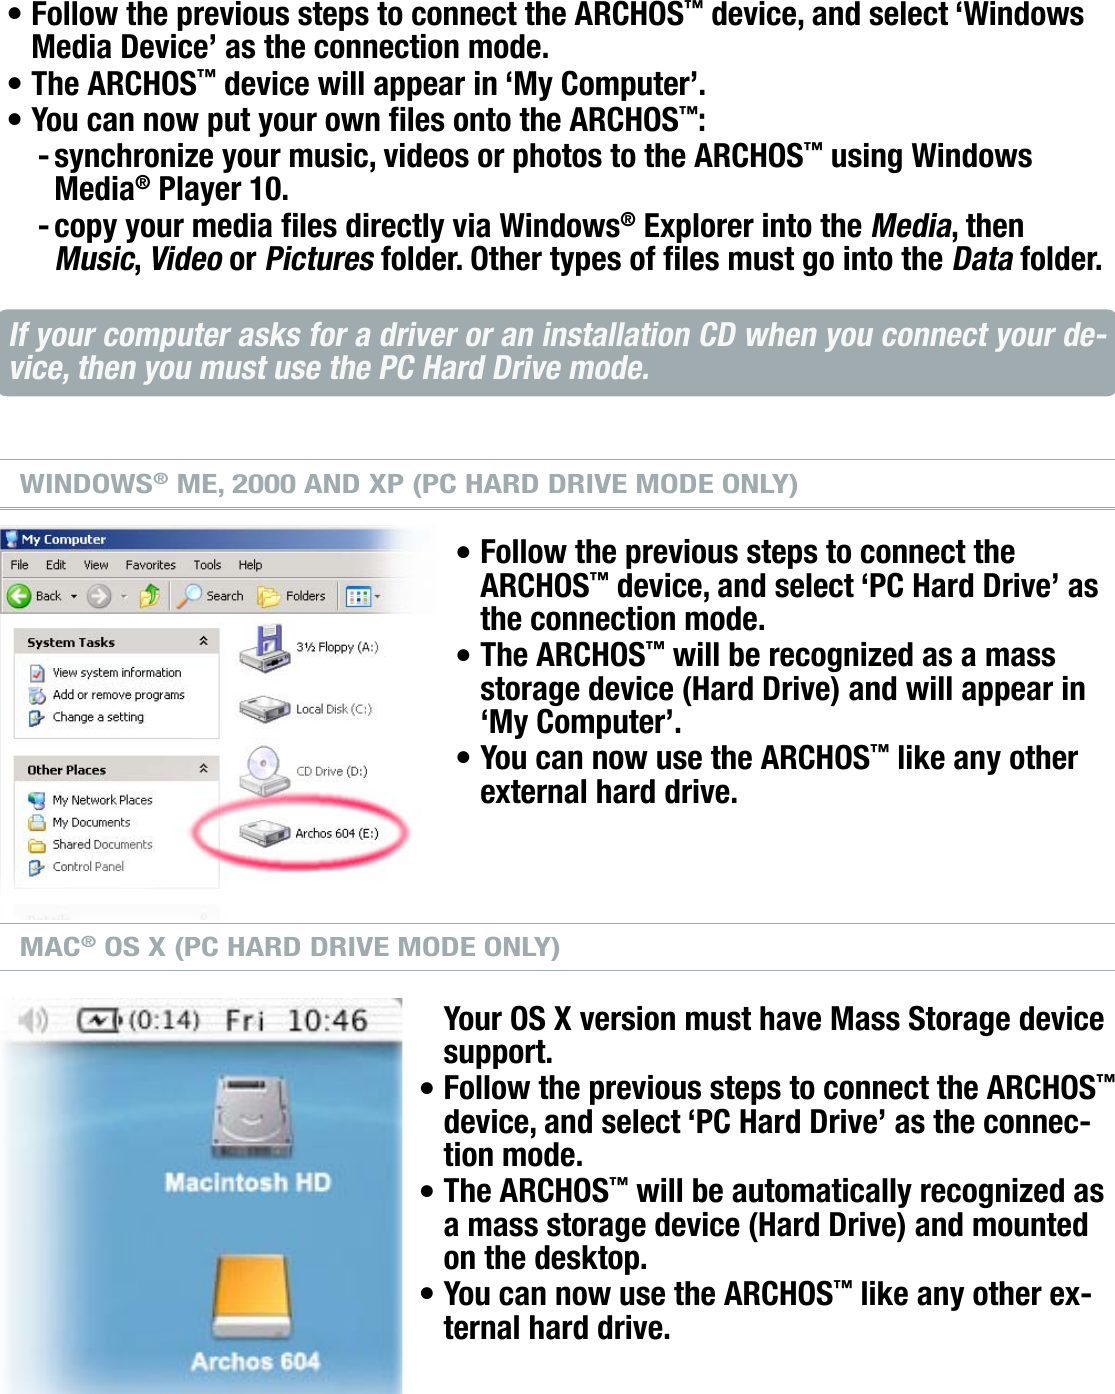 704MANUAL V0.0COMPUTER CONNECTION   &gt;   p. 45WINDOWS® XP &amp; WMP10 OR HIGHER (WINDOWS MEDIA DEVICE MODE)Follow the previous steps to connect the ARCHOS™ device, and select ‘Windows Media Device’ as the connection mode.The ARCHOS™ device will appear in ‘My Computer’.You can now put your own les onto the ARCHOS™:synchronize your music, videos or photos to the ARCHOS™ using Windows Media® Player 10.copy your media les directly via Windows® Explorer into the Media, then Music, Video or Pictures folder. Other types of les must go into the Data folder.If your computer asks for a driver or an installation CD when you connect your de-vice, then you must use the PC Hard Drive mode.WINDOWS® ME, 2000 AND XP (PC HARD DRIVE MODE ONLY)Follow the previous steps to connect the ARCHOS™ device, and select ‘PC Hard Drive’ as the connection mode.The ARCHOS™ will be recognized as a mass storage device (Hard Drive) and will appear in ‘My Computer’.You can now use the ARCHOS™ like any other external hard drive.MAC® OS X (PC HARD DRIVE MODE ONLY)Your OS X version must have Mass Storage device support.Follow the previous steps to connect the ARCHOS™ device, and select ‘PC Hard Drive’ as the connec-tion mode.The ARCHOS™ will be automatically recognized as a mass storage device (Hard Drive) and mounted on the desktop.You can now use the ARCHOS™ like any other ex-ternal hard drive.•••--••••••